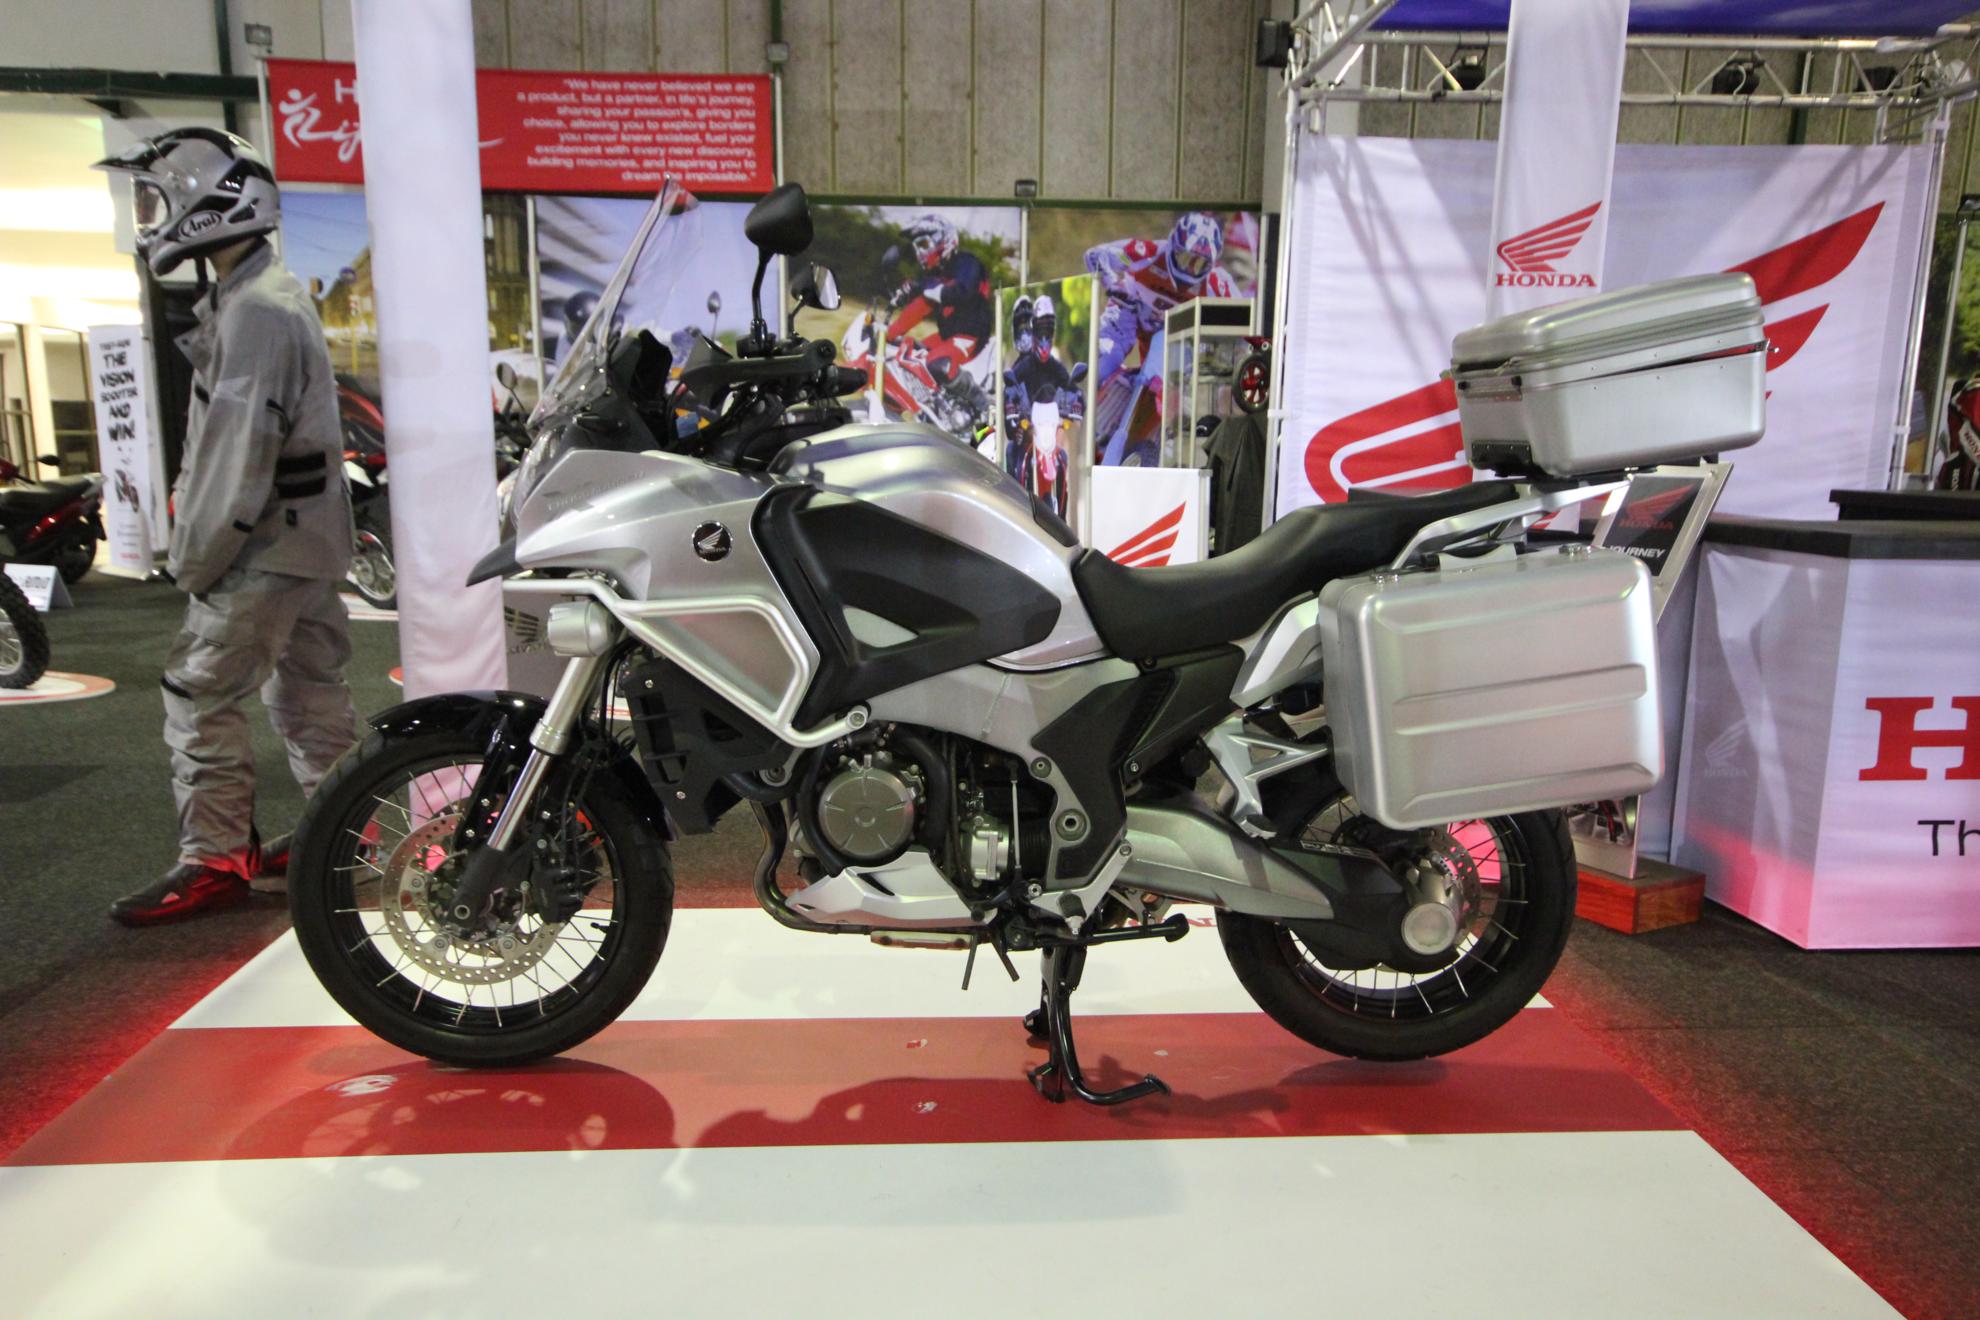 Images of the Amid Motorcycle Show Honda